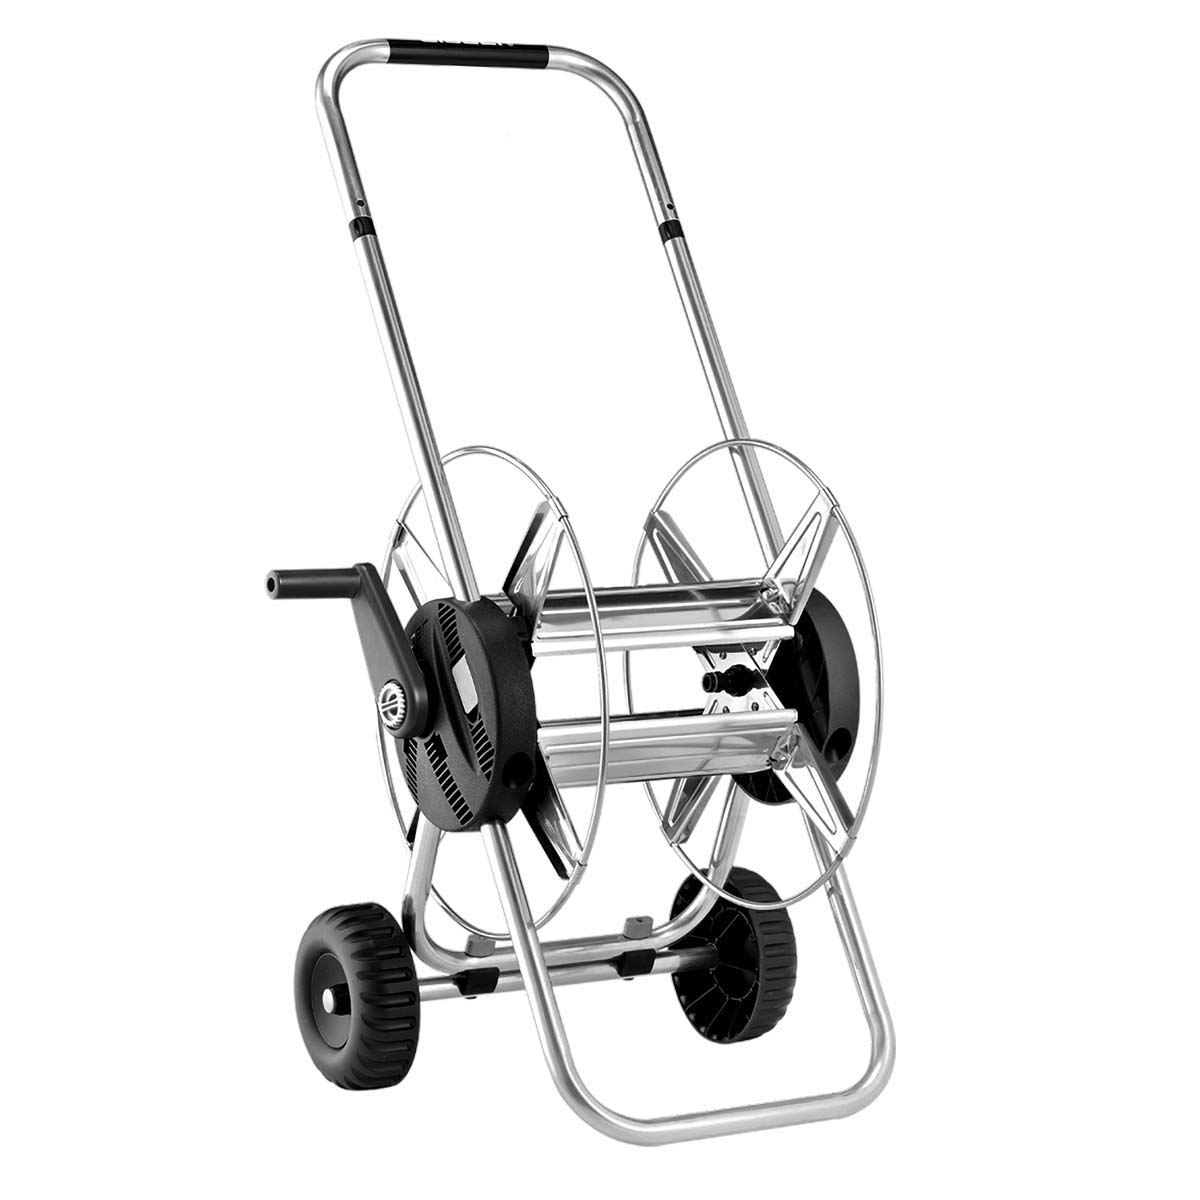 CLABER Lightweight WHEELED Metal Hose Reel 100m Window Cleaning